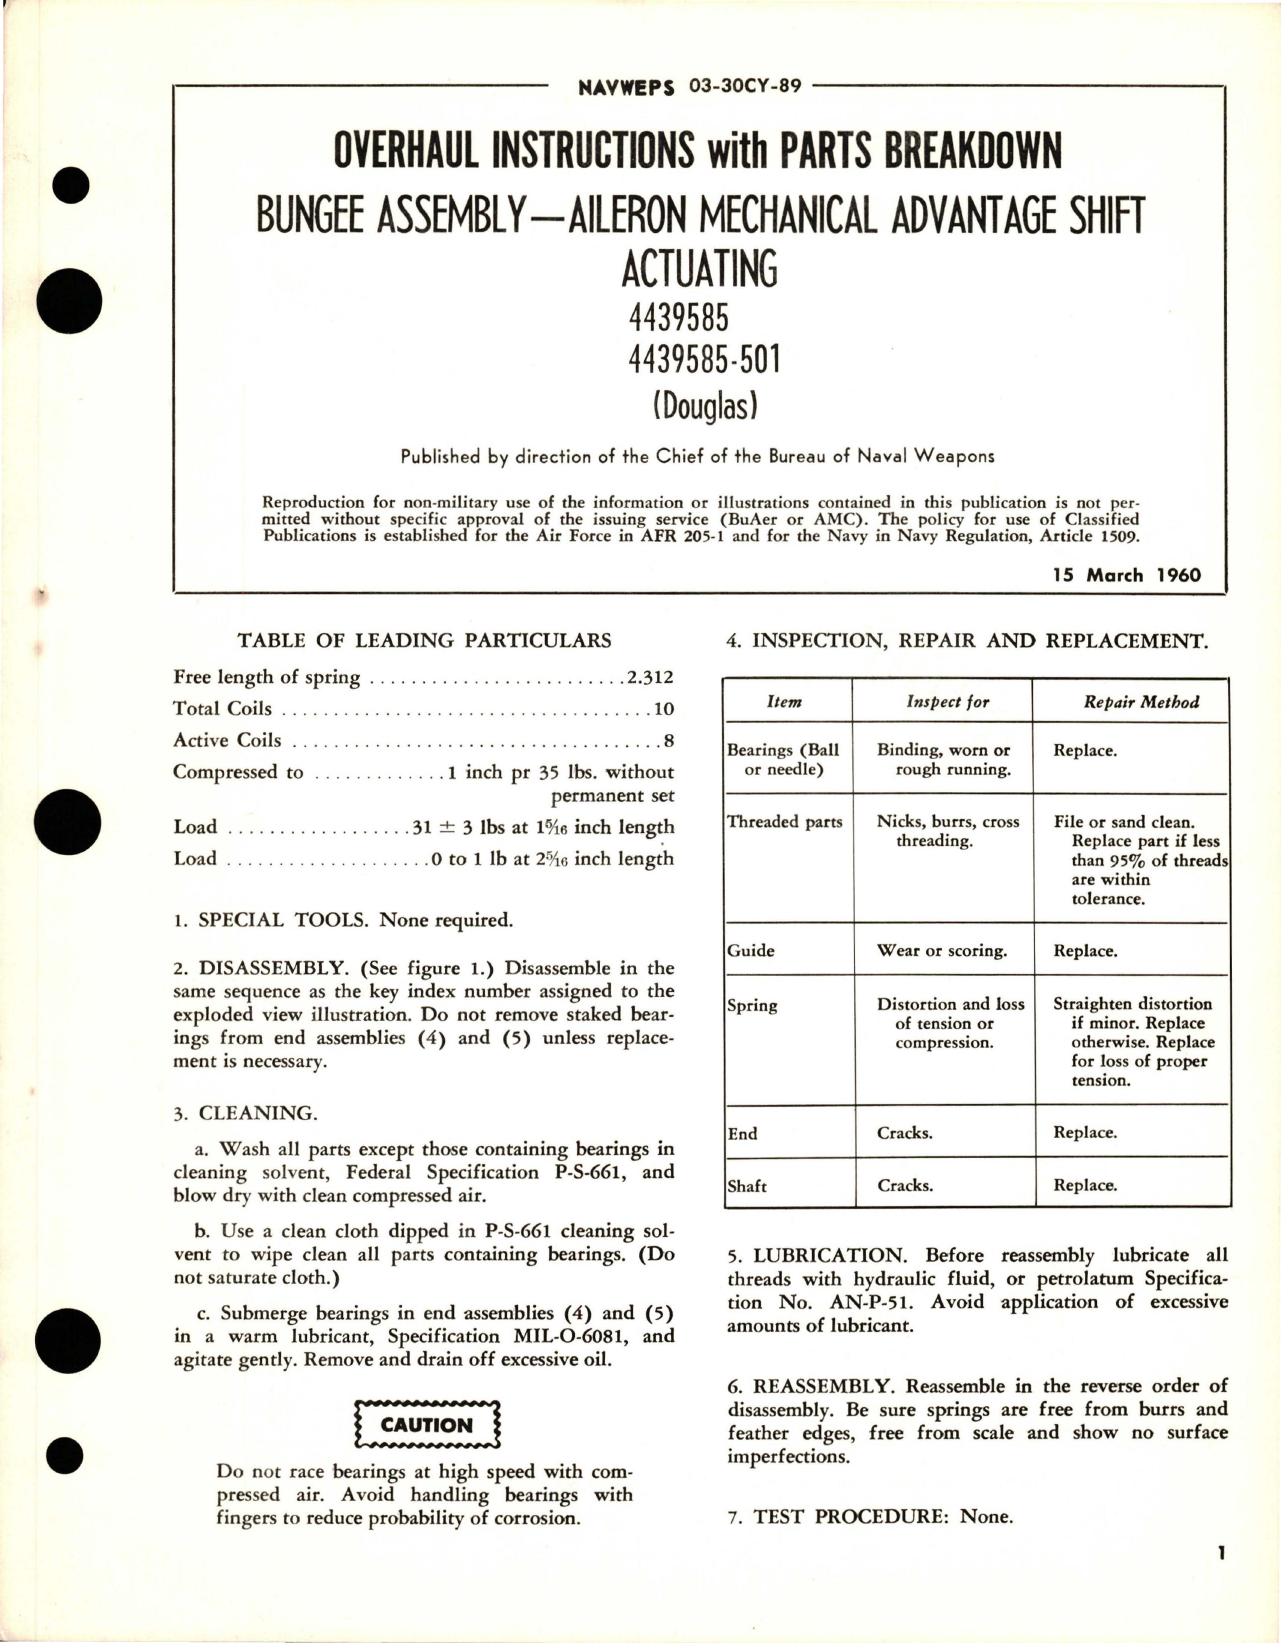 Sample page 1 from AirCorps Library document: Overhaul Instructions with Parts Breakdown for Aileron Mechanical Advantage Shift Actuating Bungee Assembly